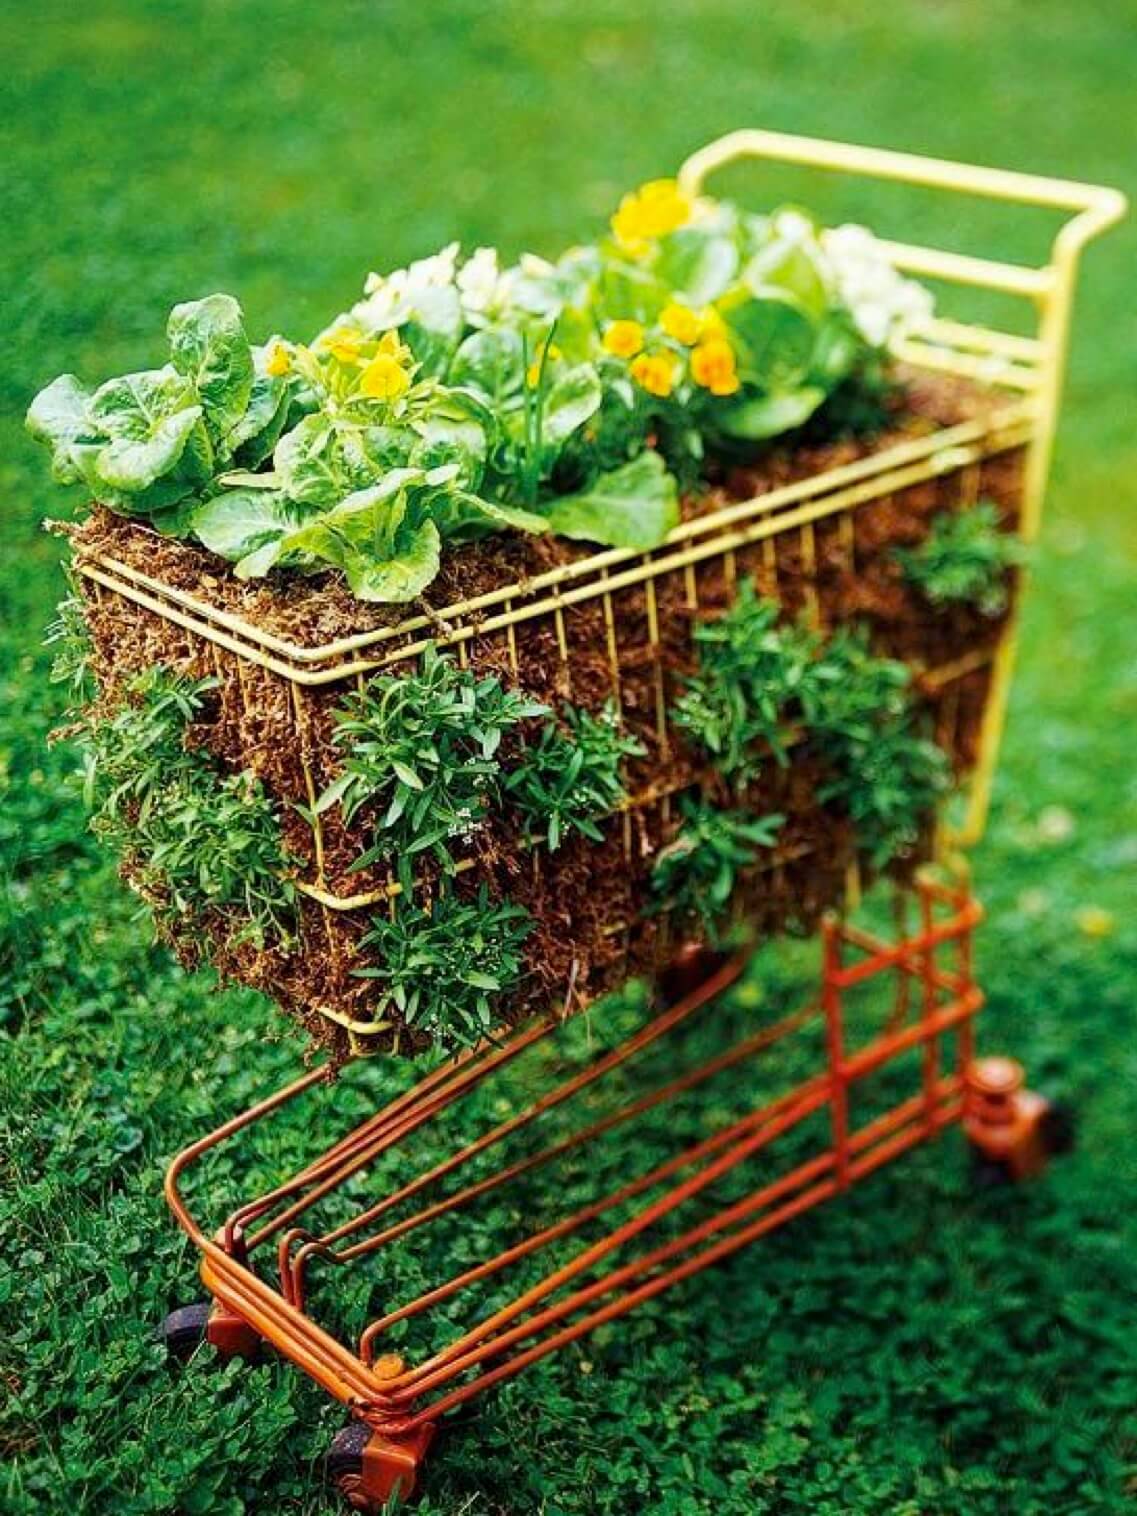 Upcycled Vintage Garden Containers